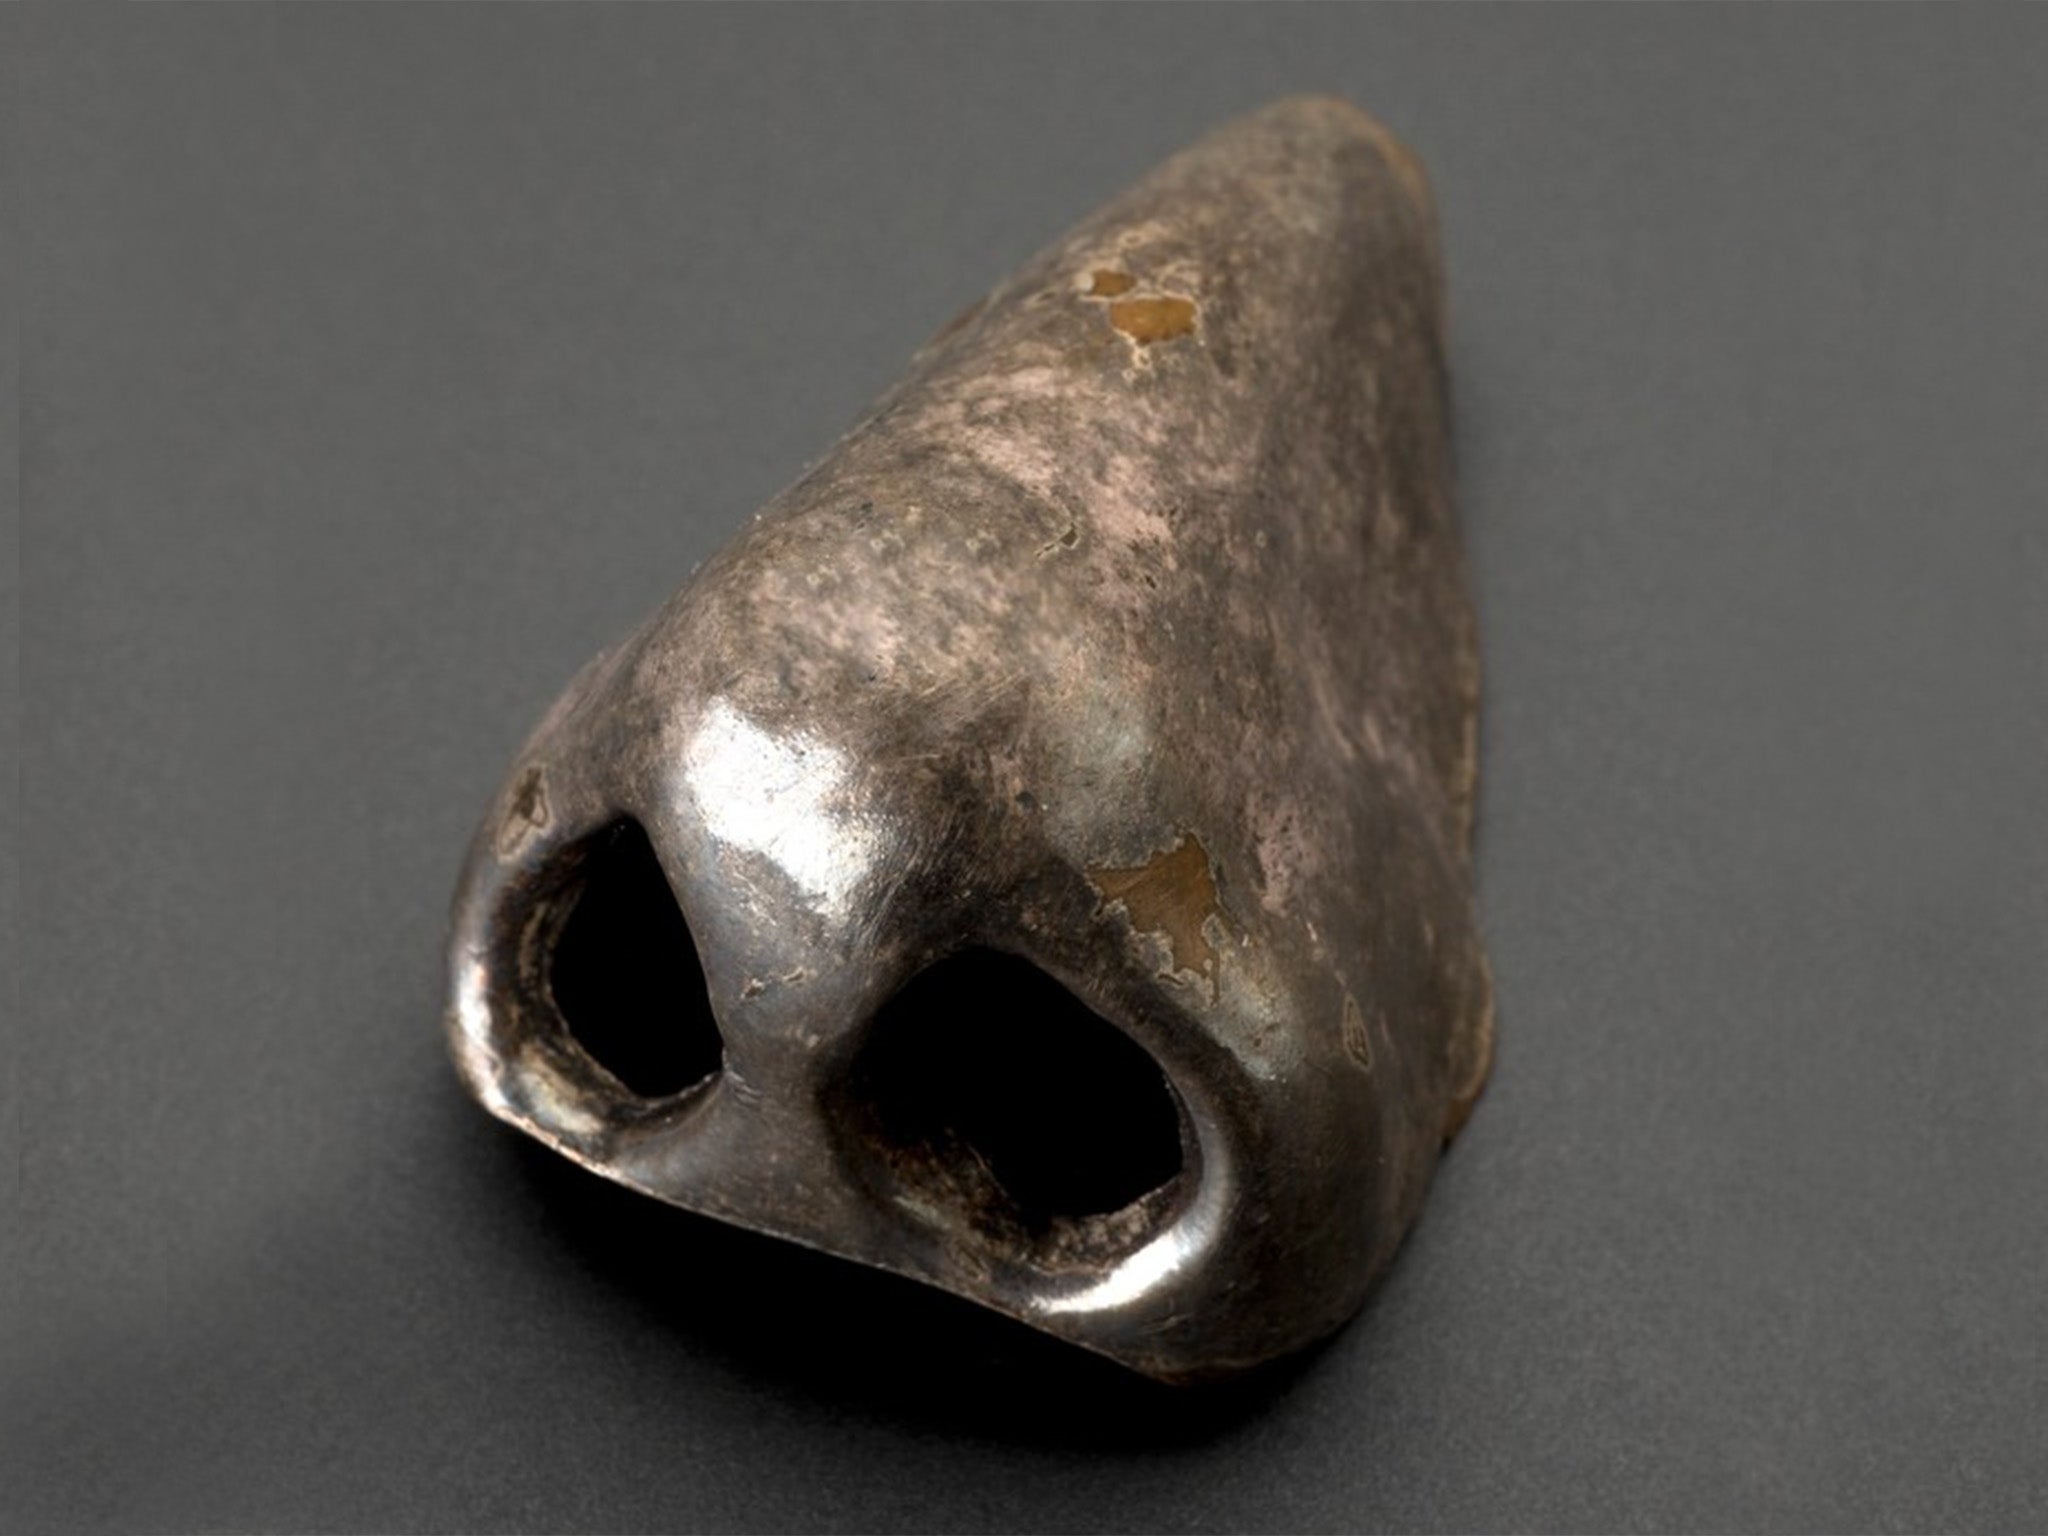 In 1624 a man lost his nose in combat so decided to buy a new one